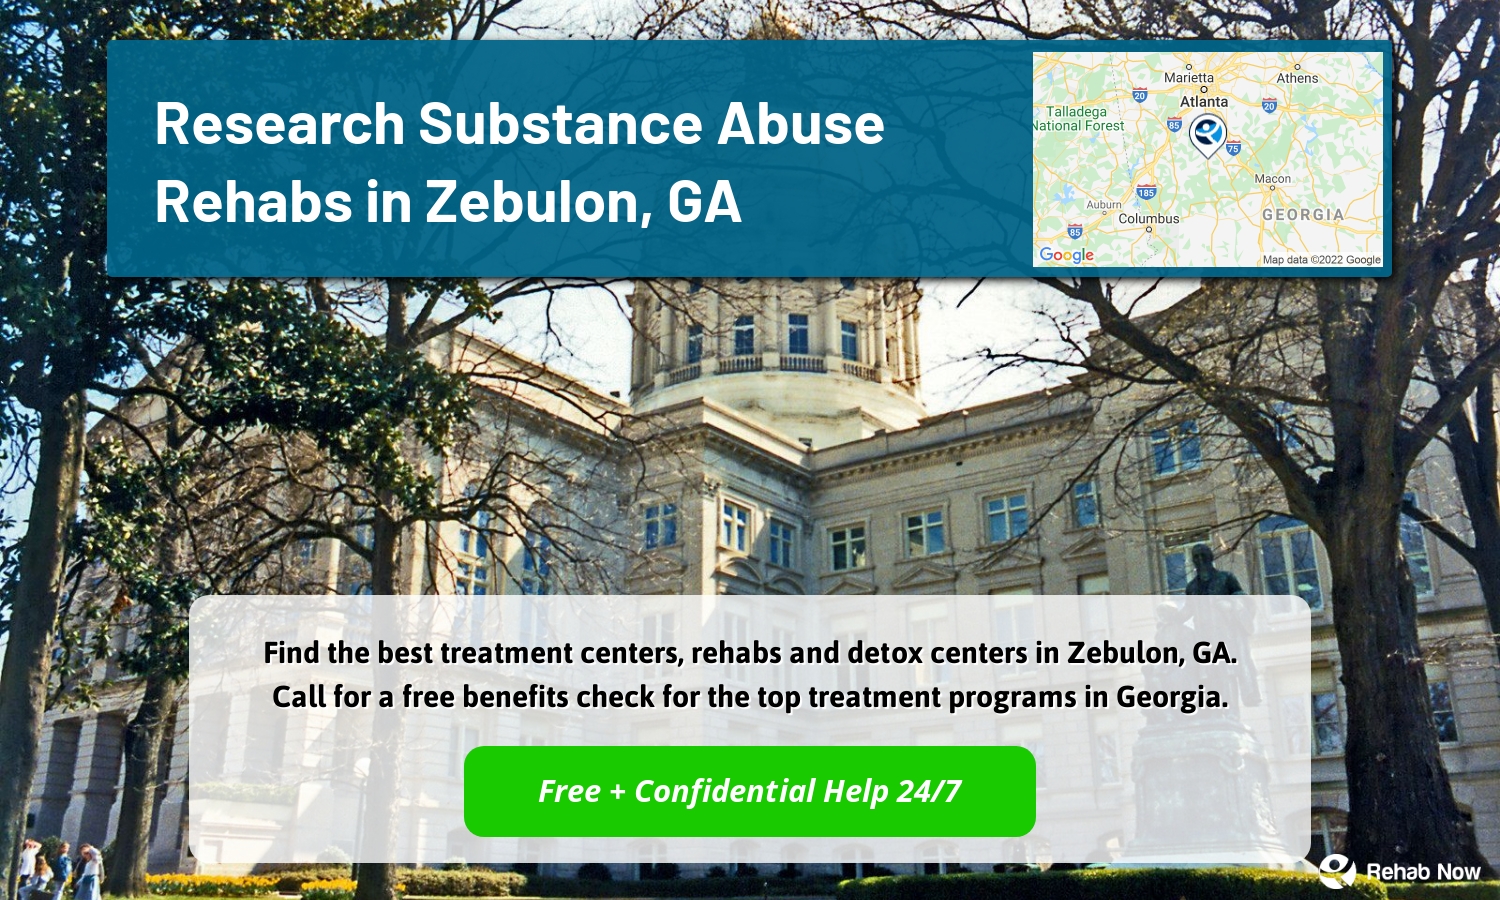 Find the best treatment centers, rehabs and detox centers in Zebulon, GA. Call for a free benefits check for the top treatment programs in Georgia.